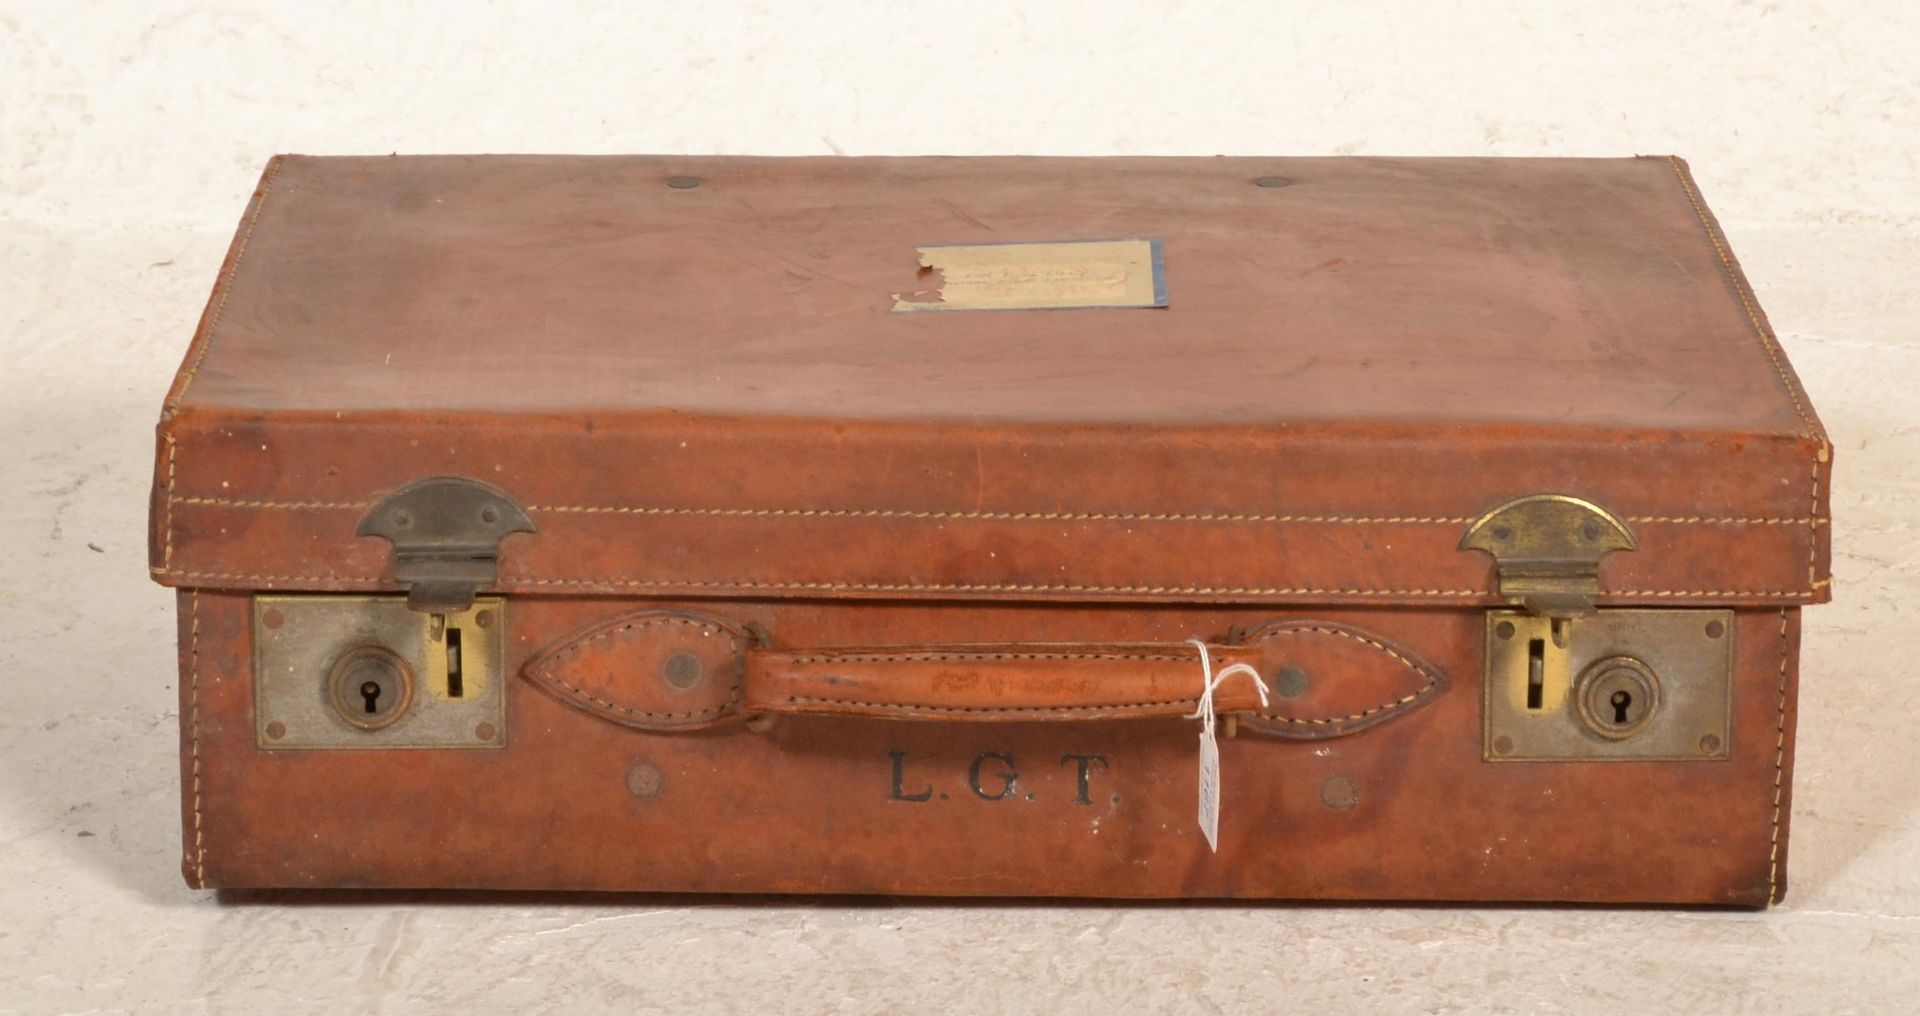 A good quality early 20th century leather suitcase with clasp locks and leather handles, remains - Image 2 of 4